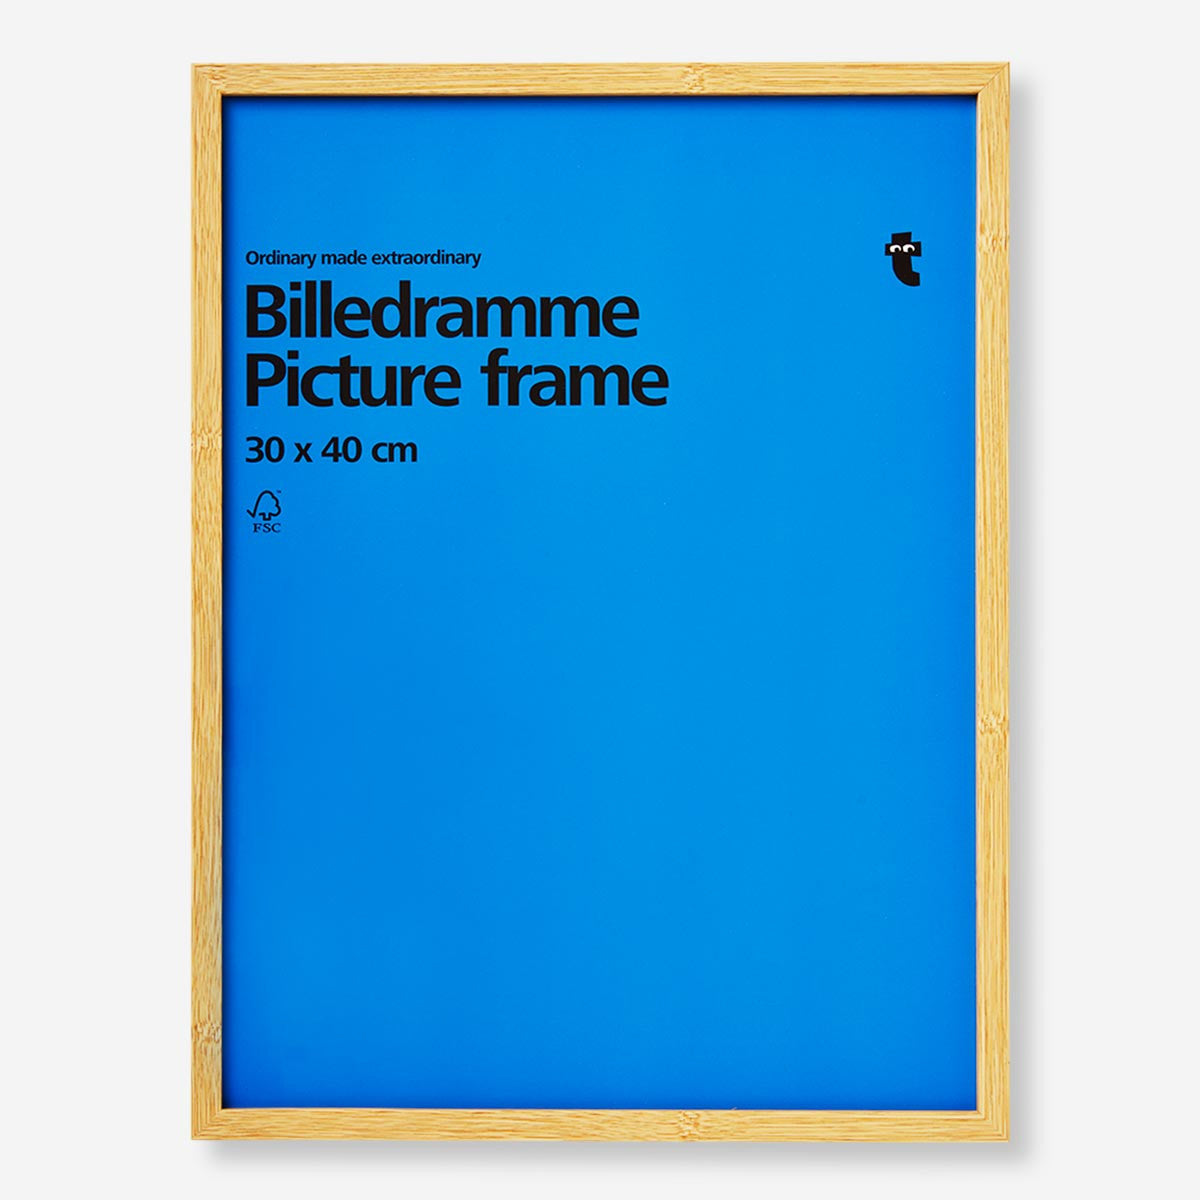 Picture frame. 30x40 cm €7